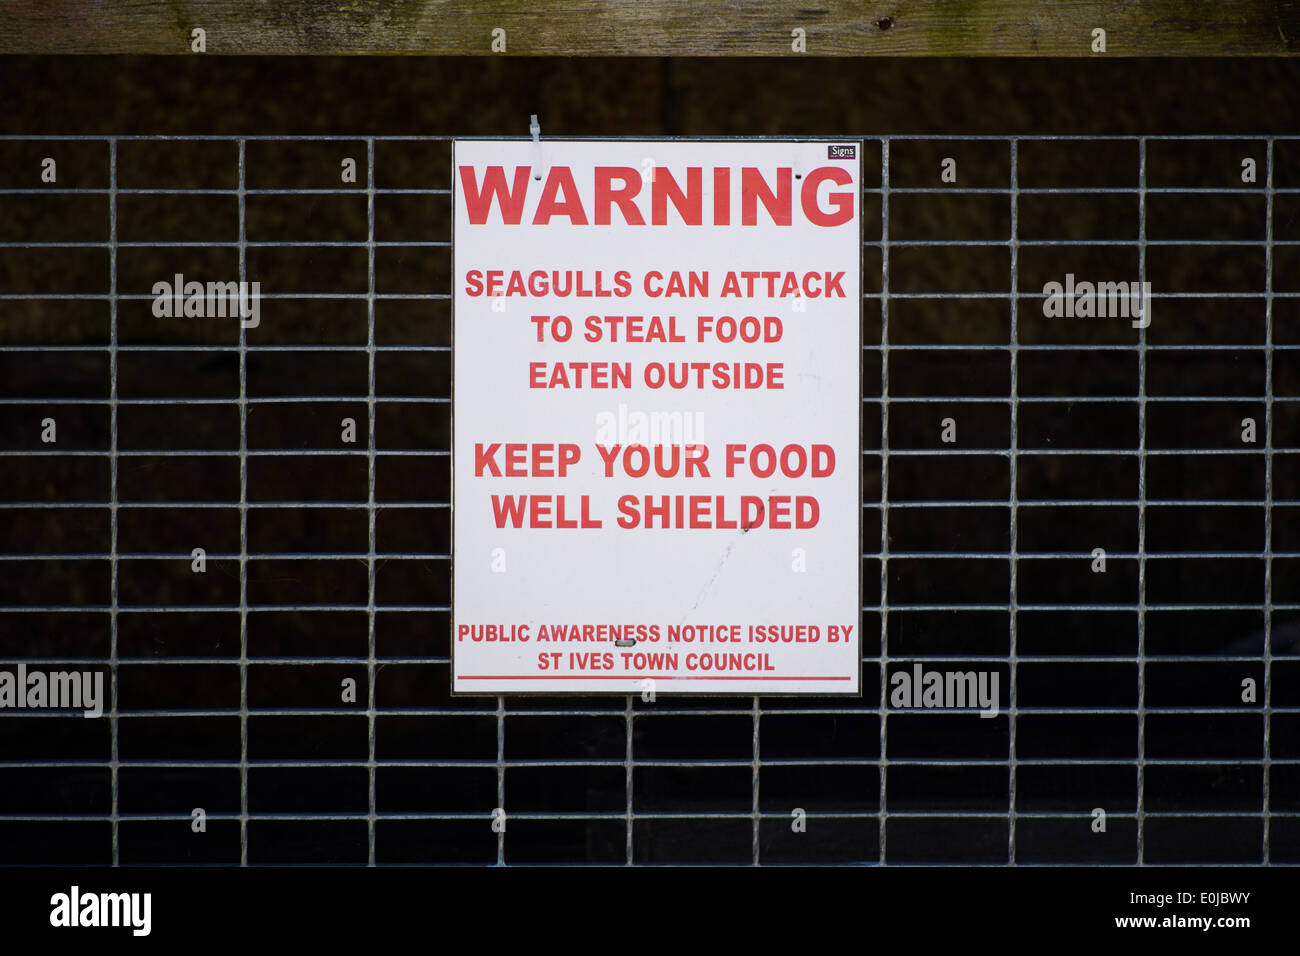 A sign in St Ives warning people that local seagulls may attack to steal food and advising people to keep their food shielded. Stock Photo